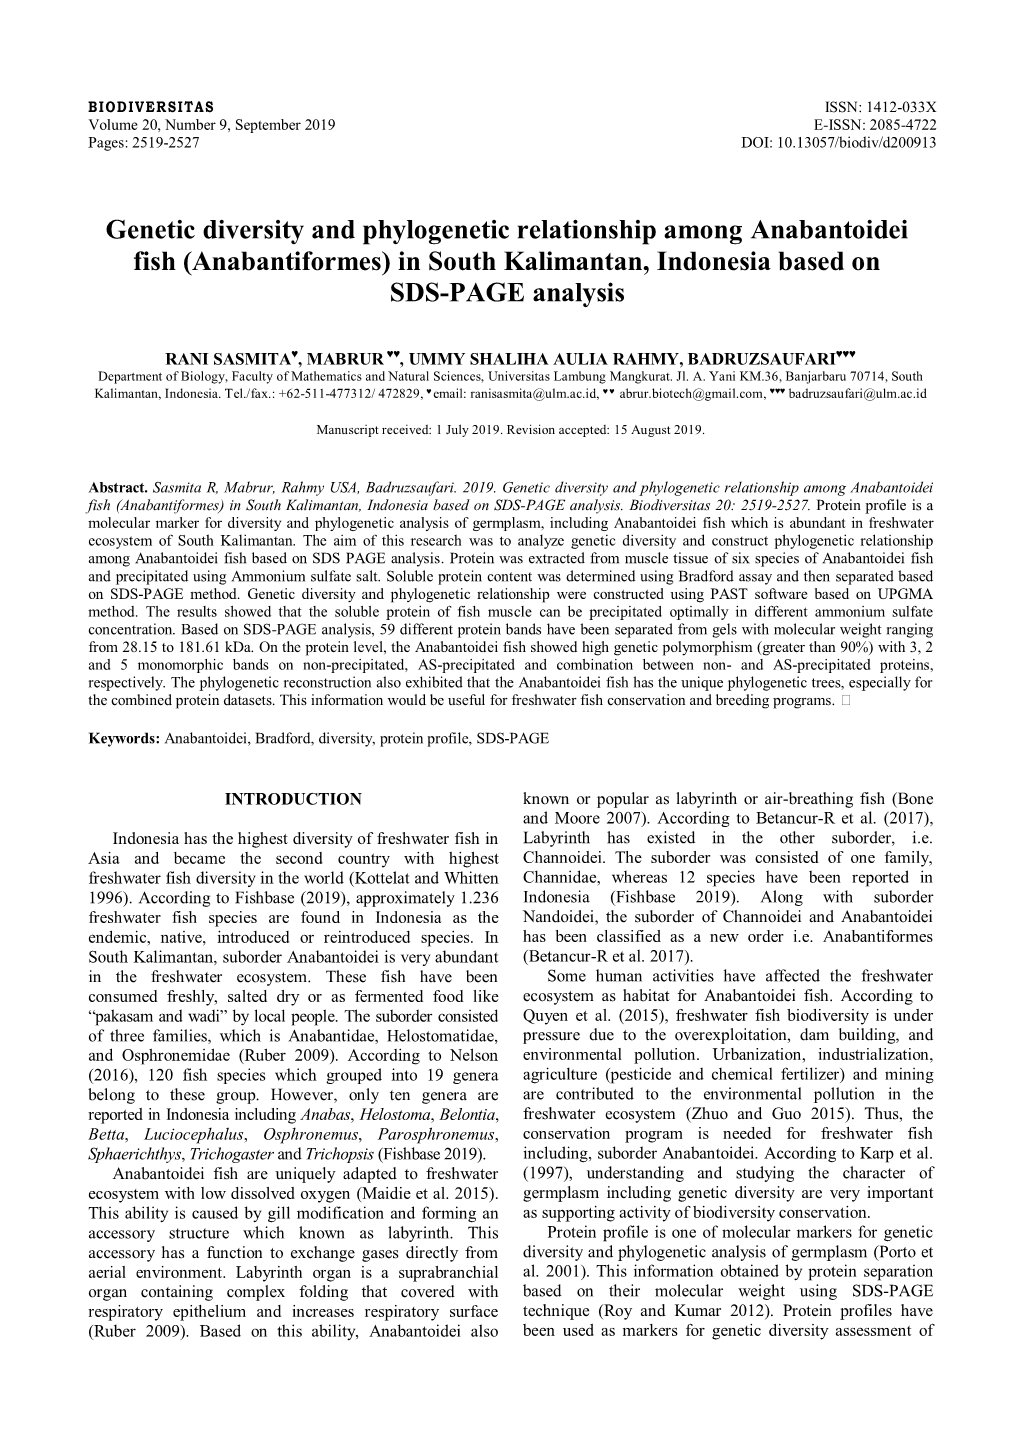 Genetic Diversity and Phylogenetic Relationship Among Anabantoidei Fish (Anabantiformes) in South Kalimantan, Indonesia Based on SDS-PAGE Analysis